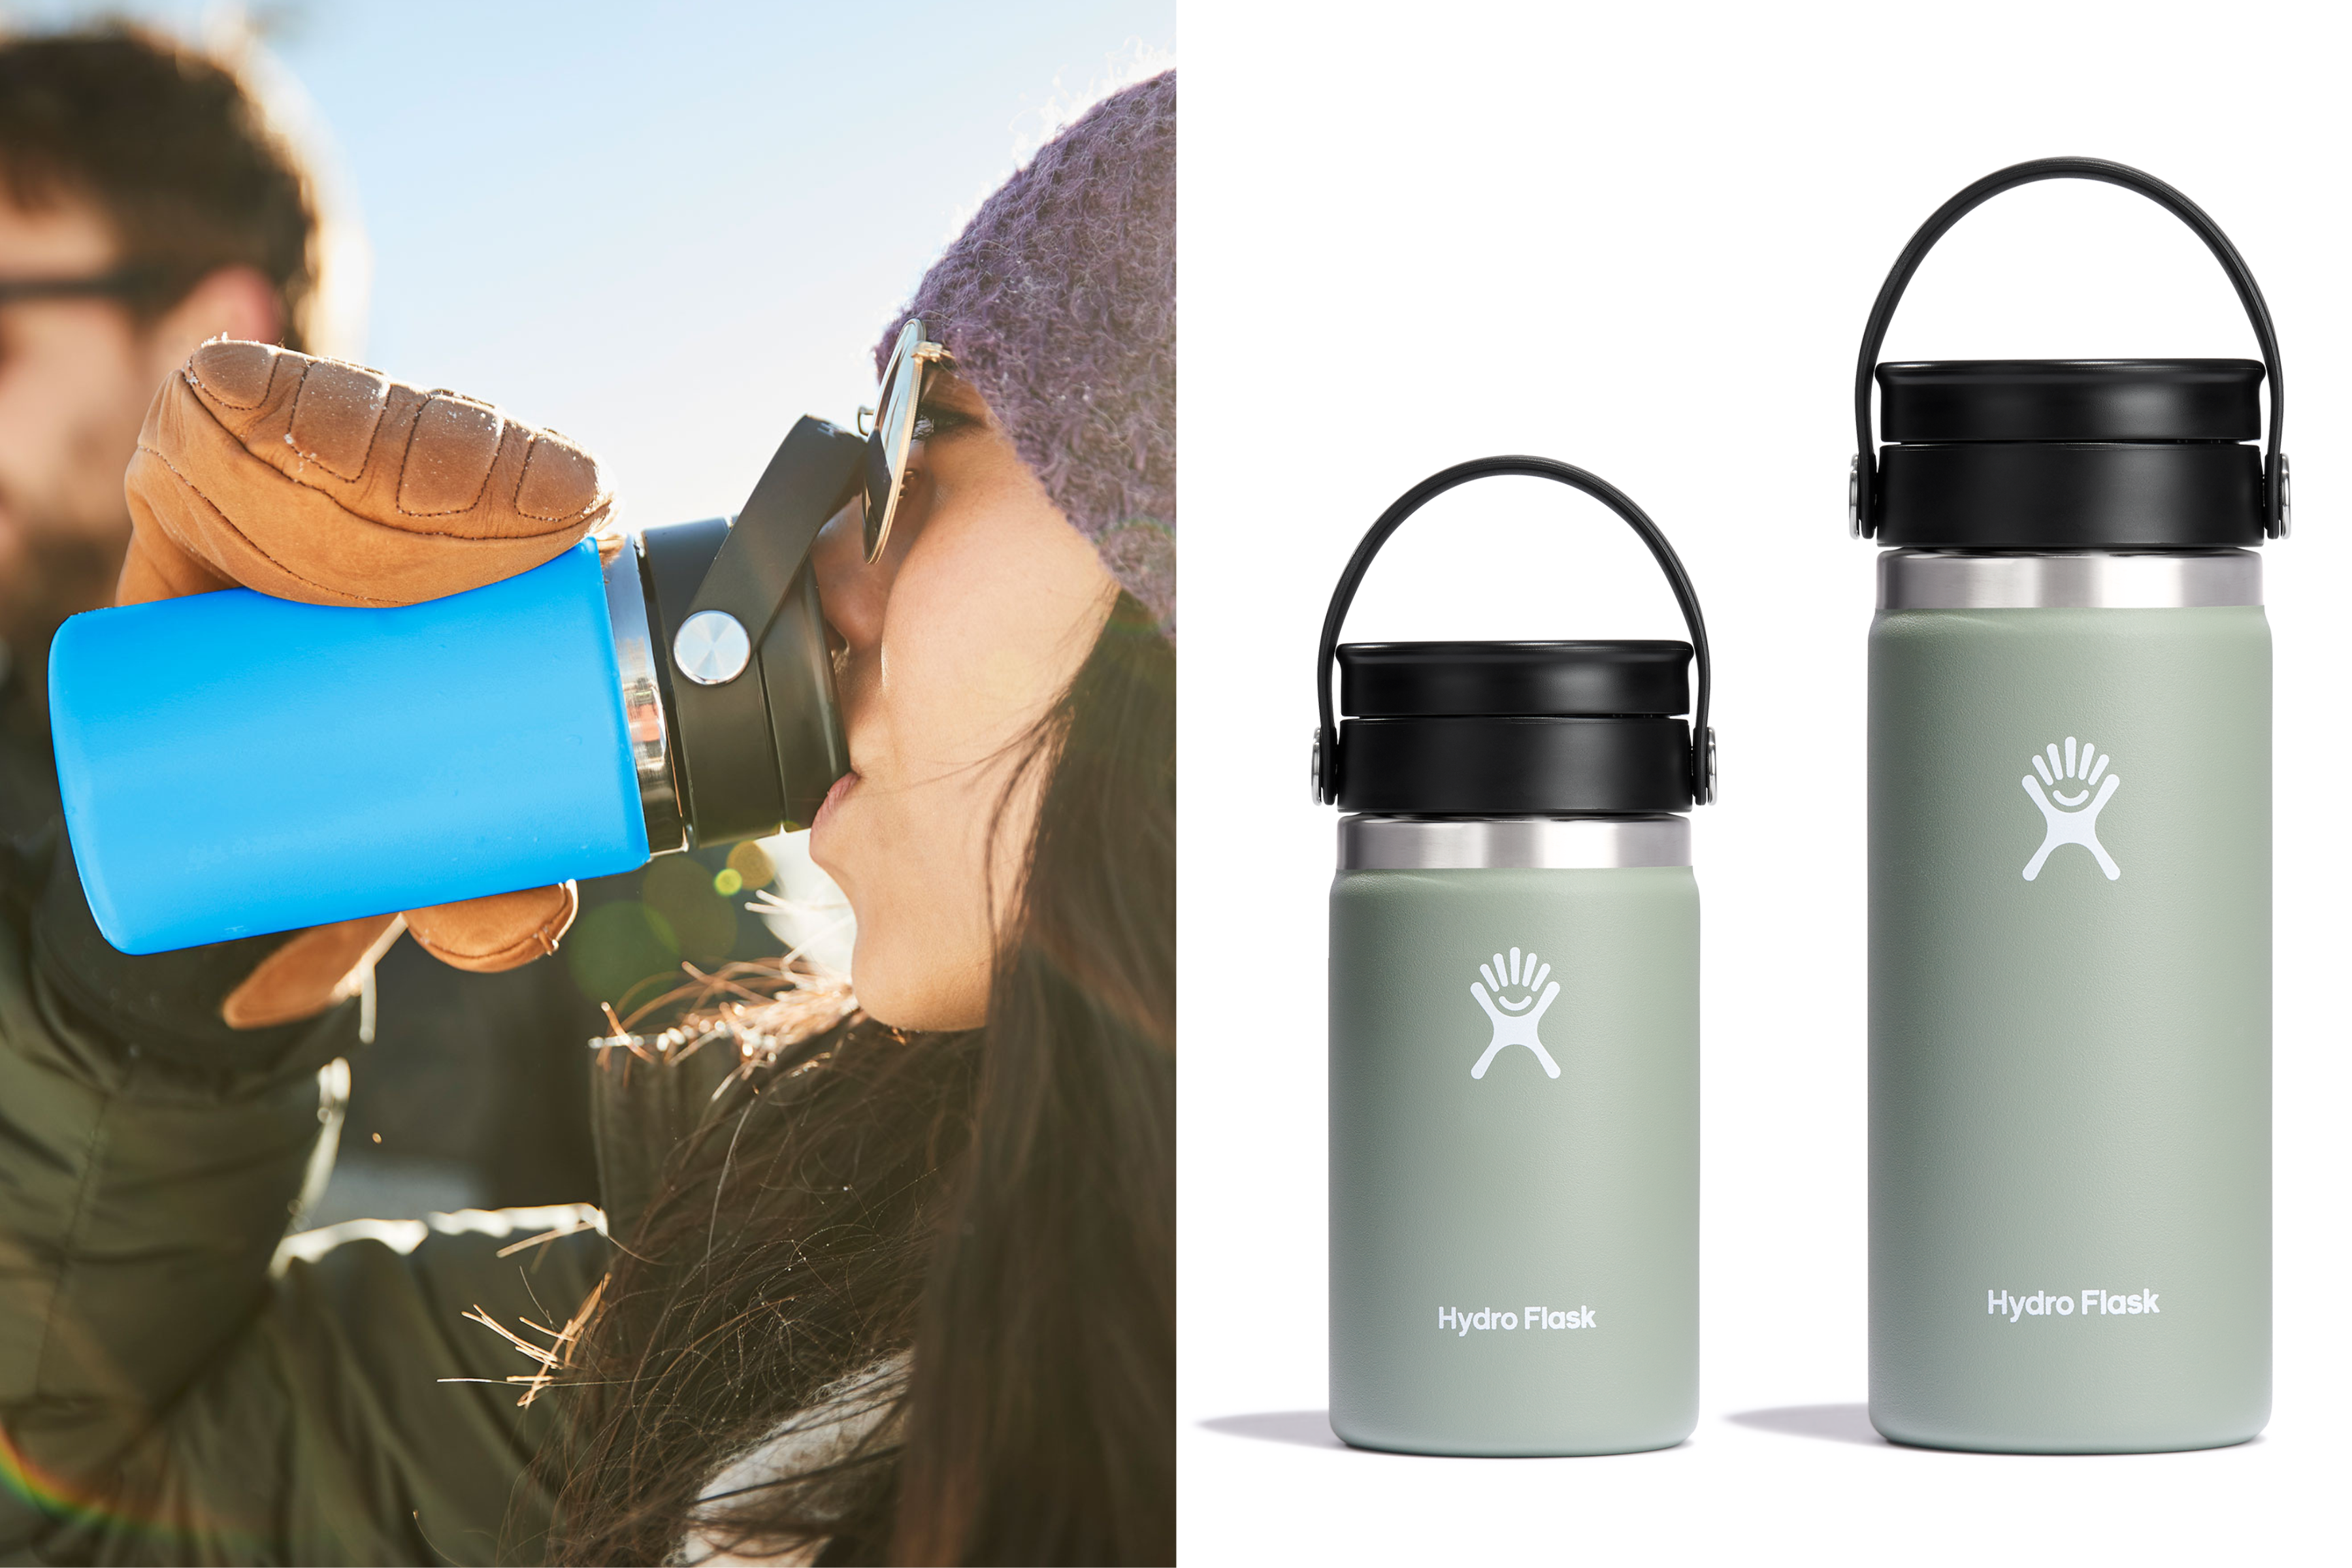 Hydro Flask has come out with 'THE' coffee cup you need – Adventure 52